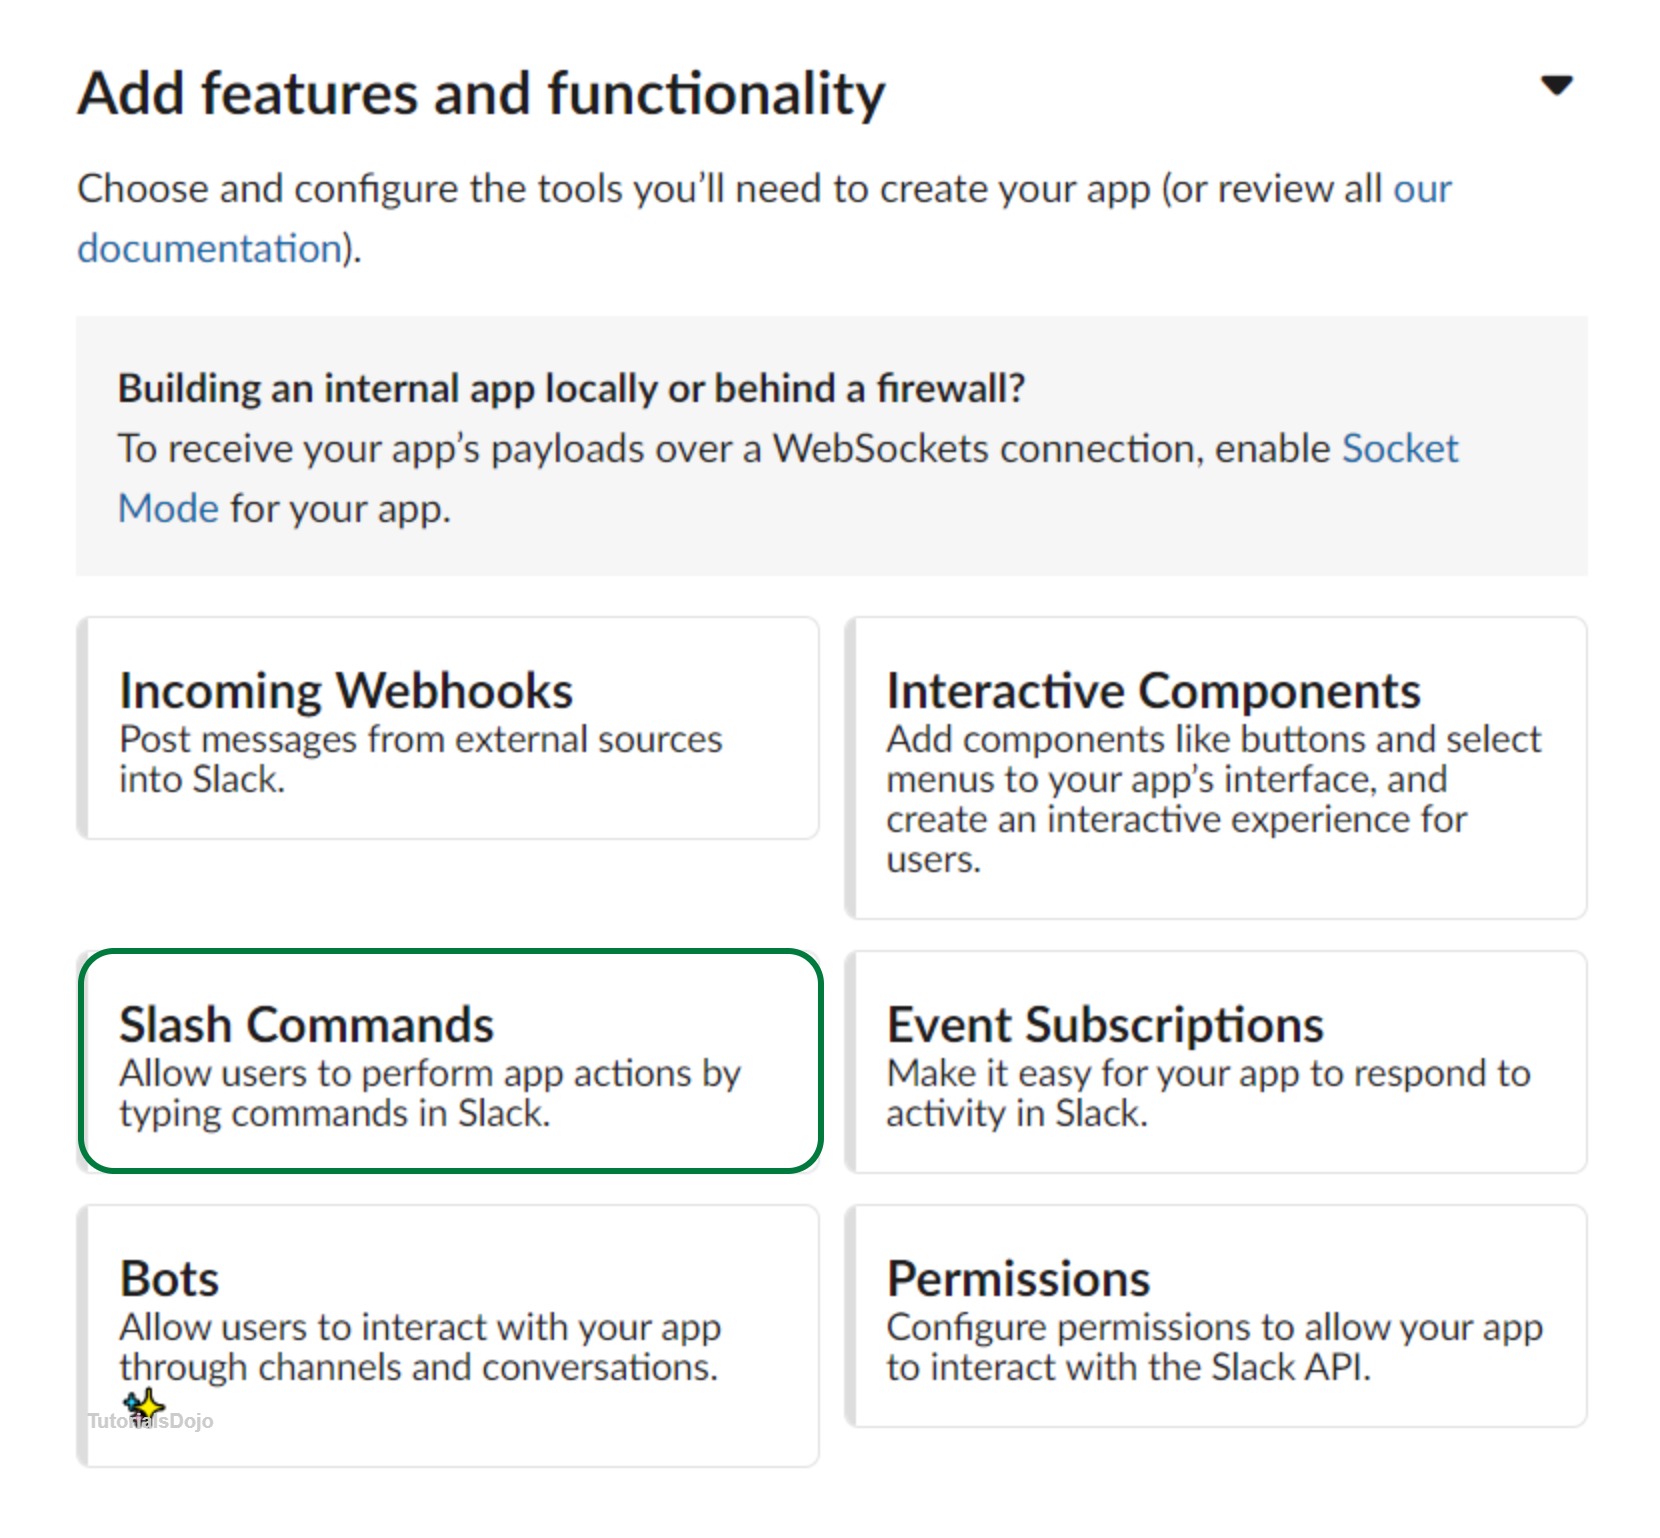 Build Your Own Slack commands with Lambda function URL